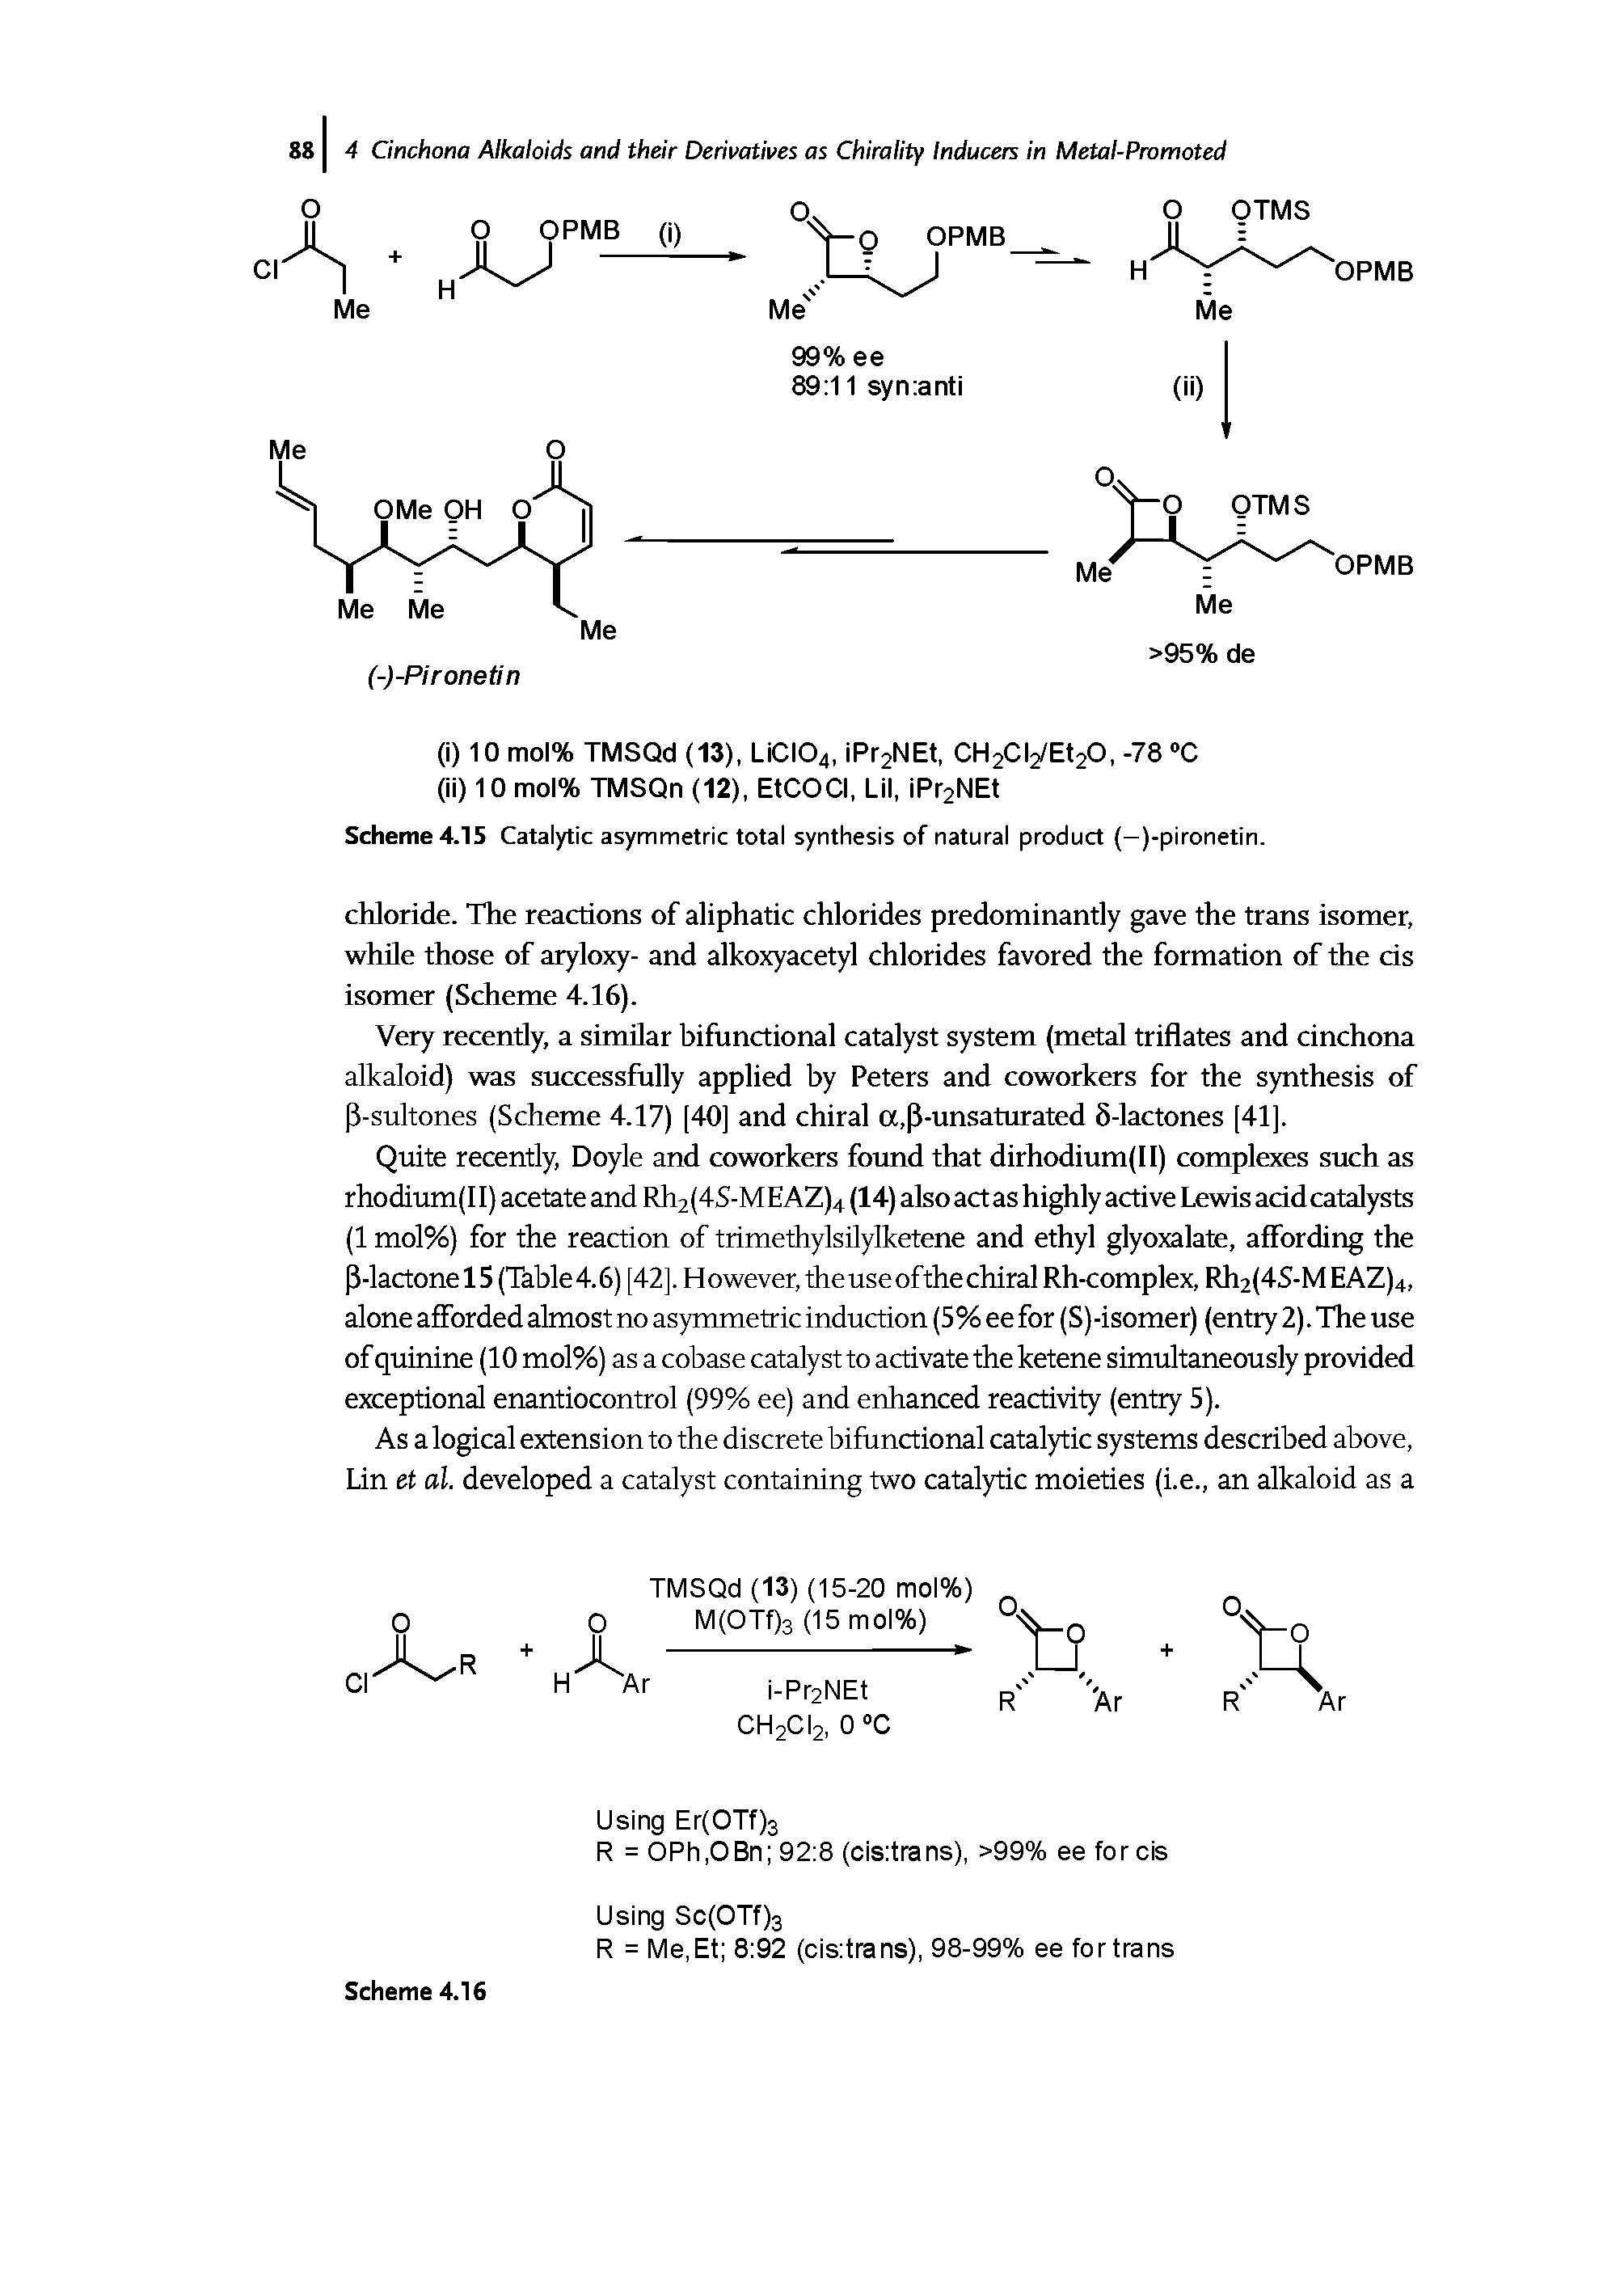 Scheme 4.15 Catalytic asymmetric total synthesis of natural product (-)-pironetin.